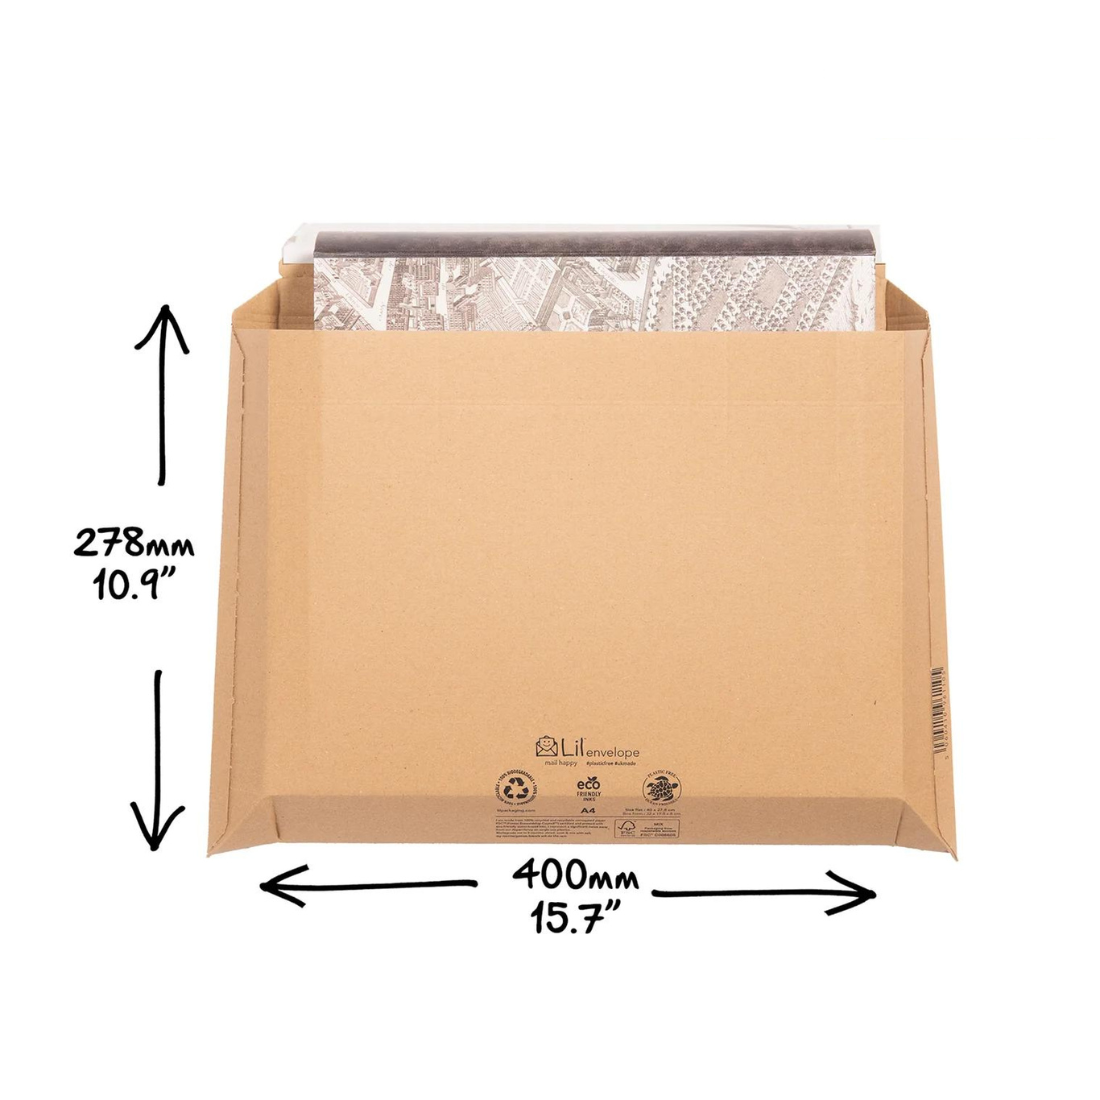 Cardboard Envelopes 400 x 278 mm (A4) - Perfect for delivering clothing, big books, cook books, puzzles, paintings, arts & craft materials, posters, maps, calendars and lots of other big, flat items (PACK OF 50)